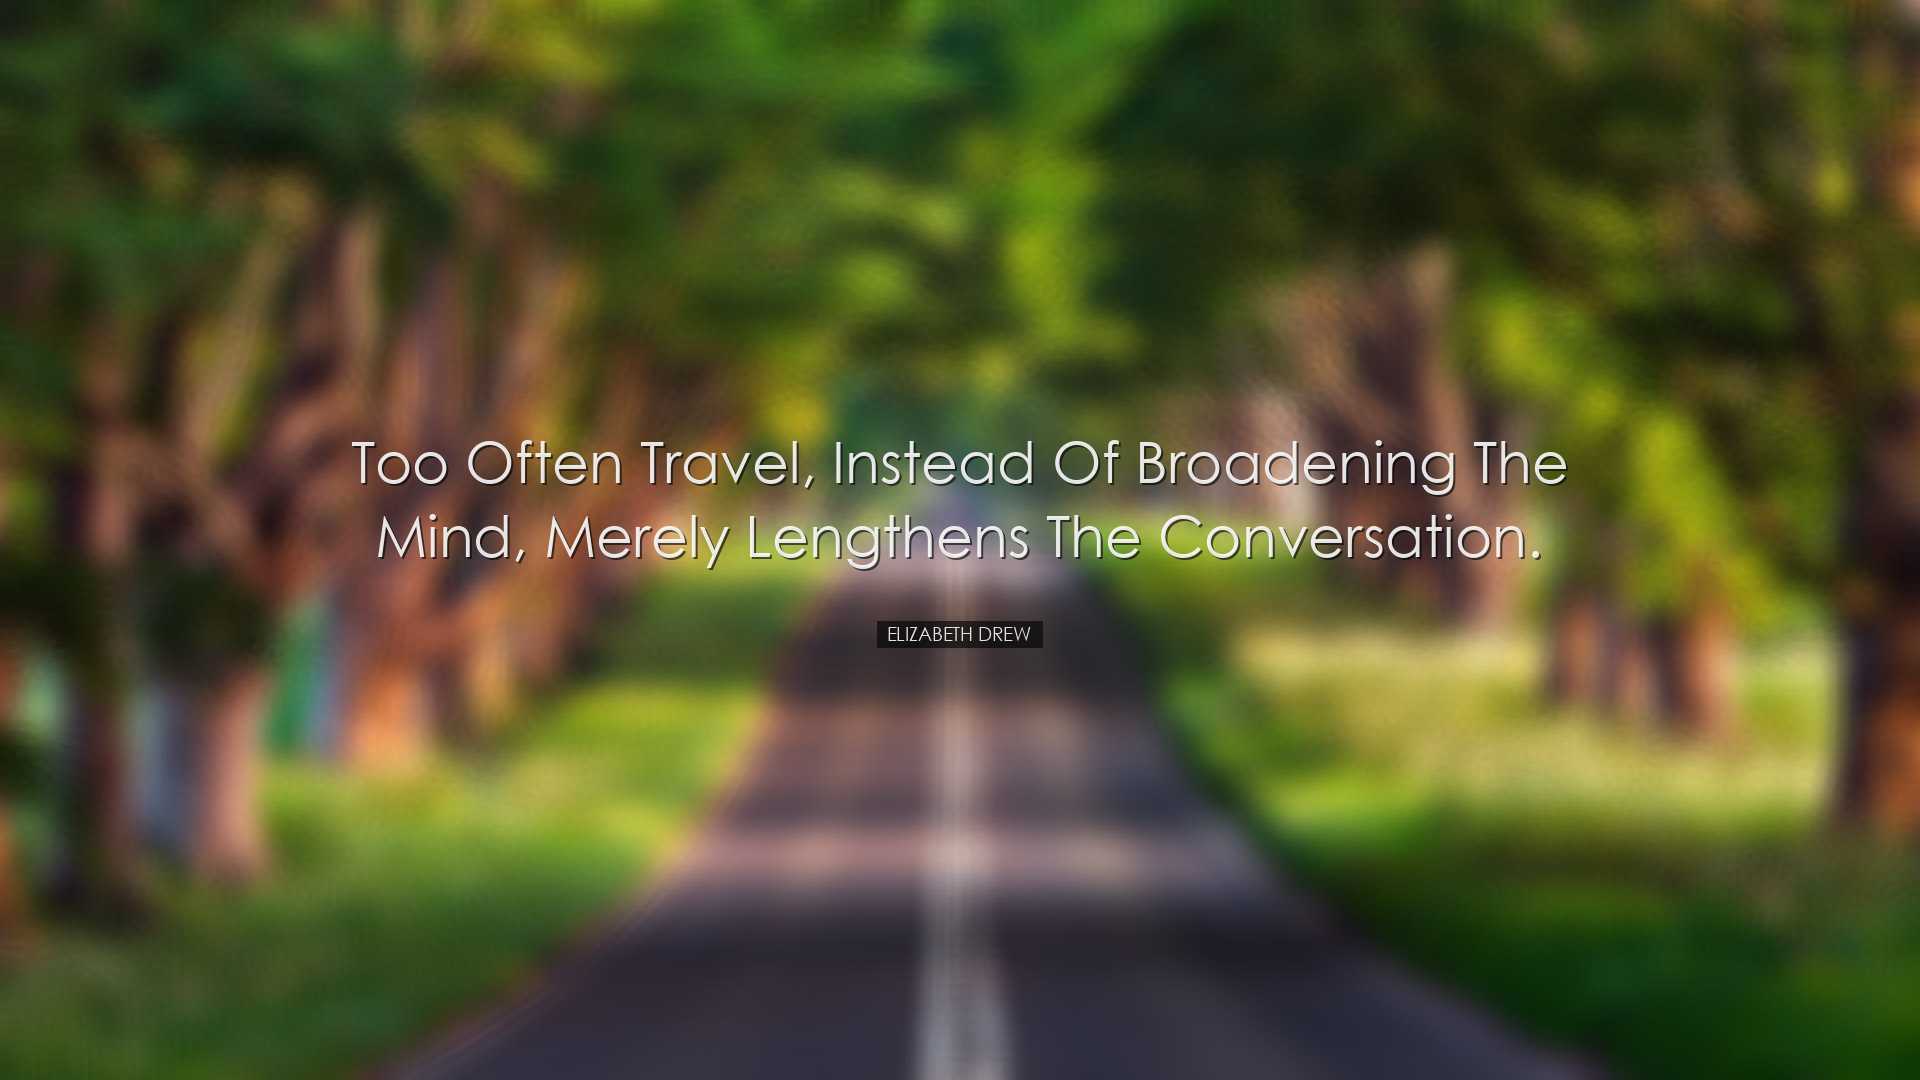 Too often travel, instead of broadening the mind, merely lengthens